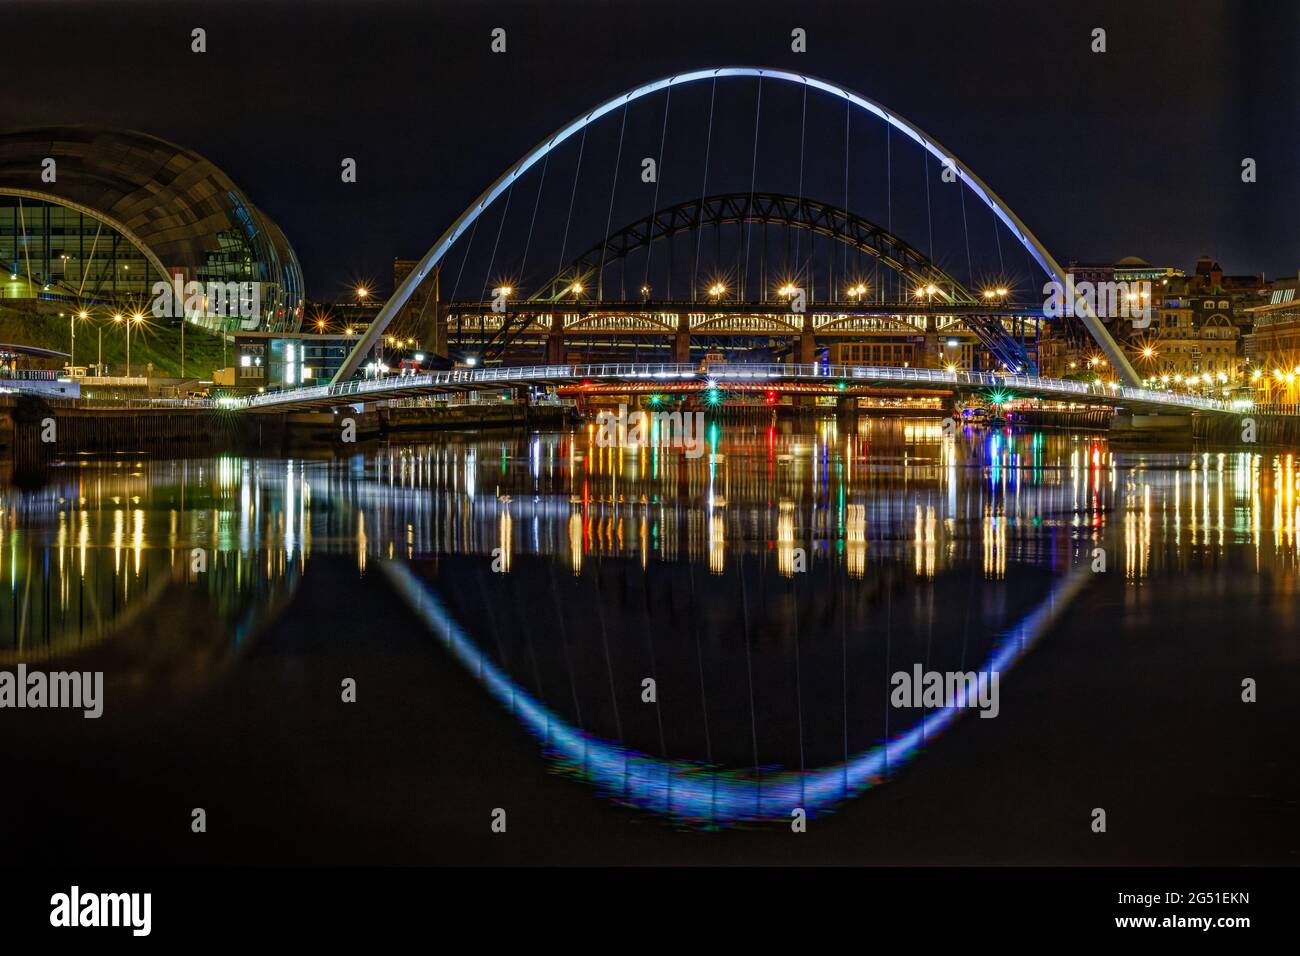 The River Tyne In Newcastle At Night Stock Photo